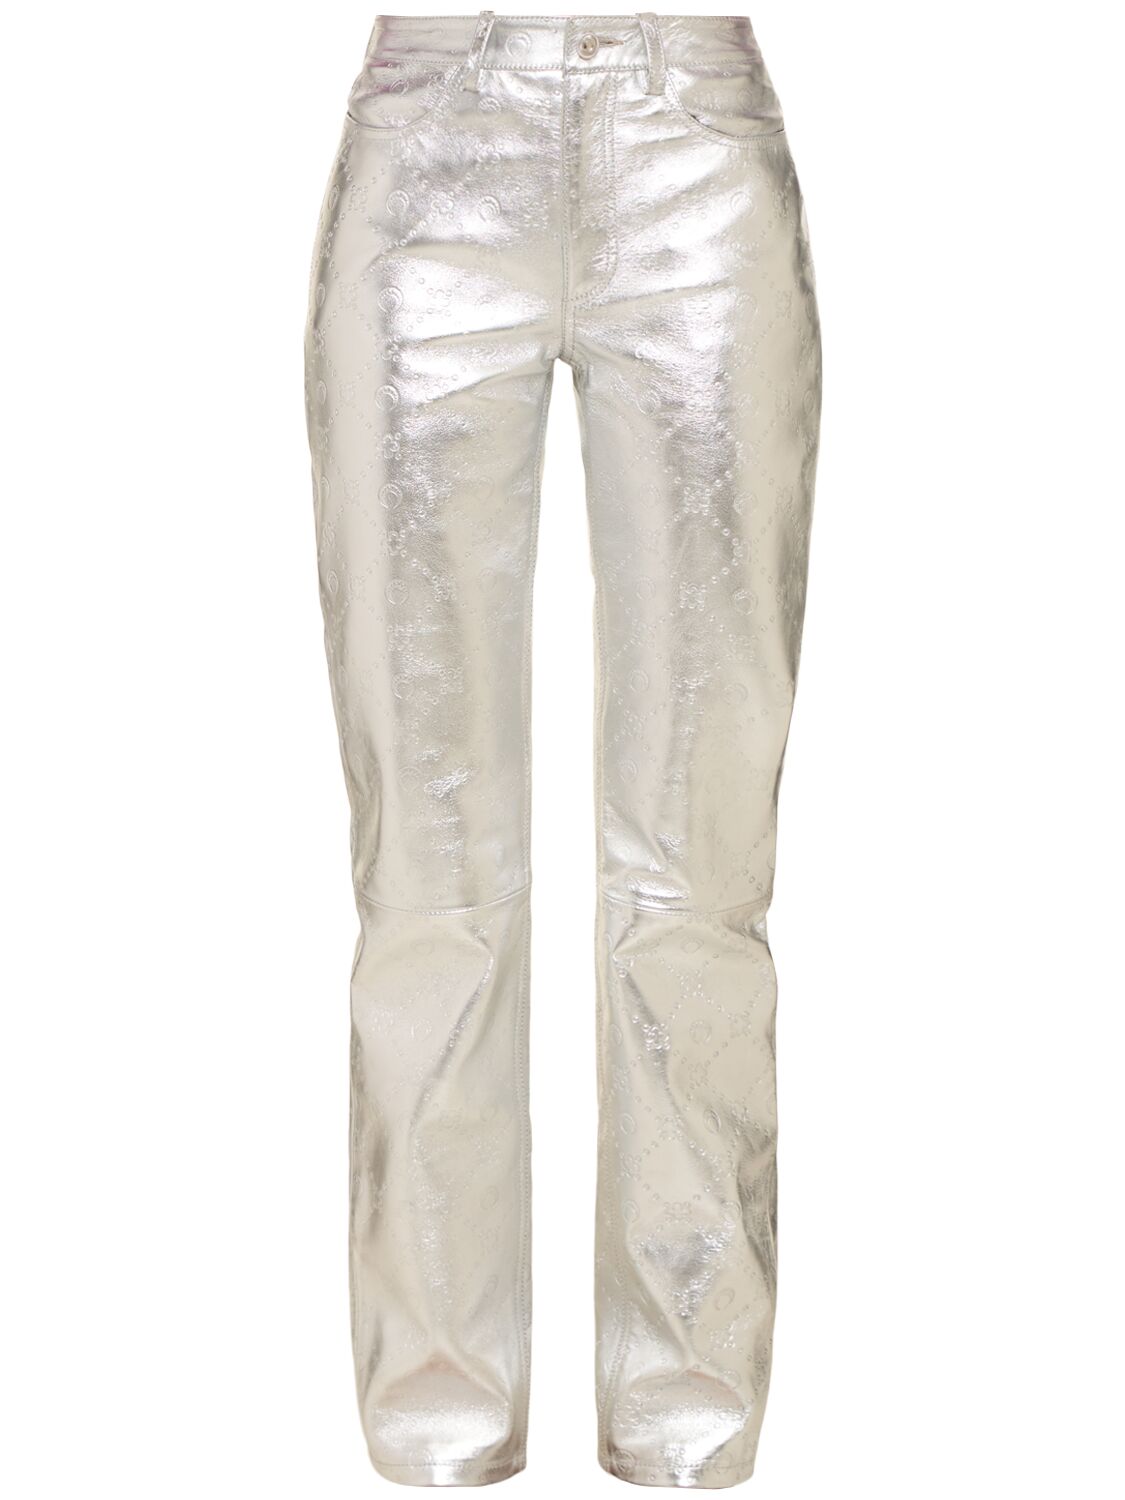 Marine Serre Laminated Leather Straight Leg Trousers In Silver